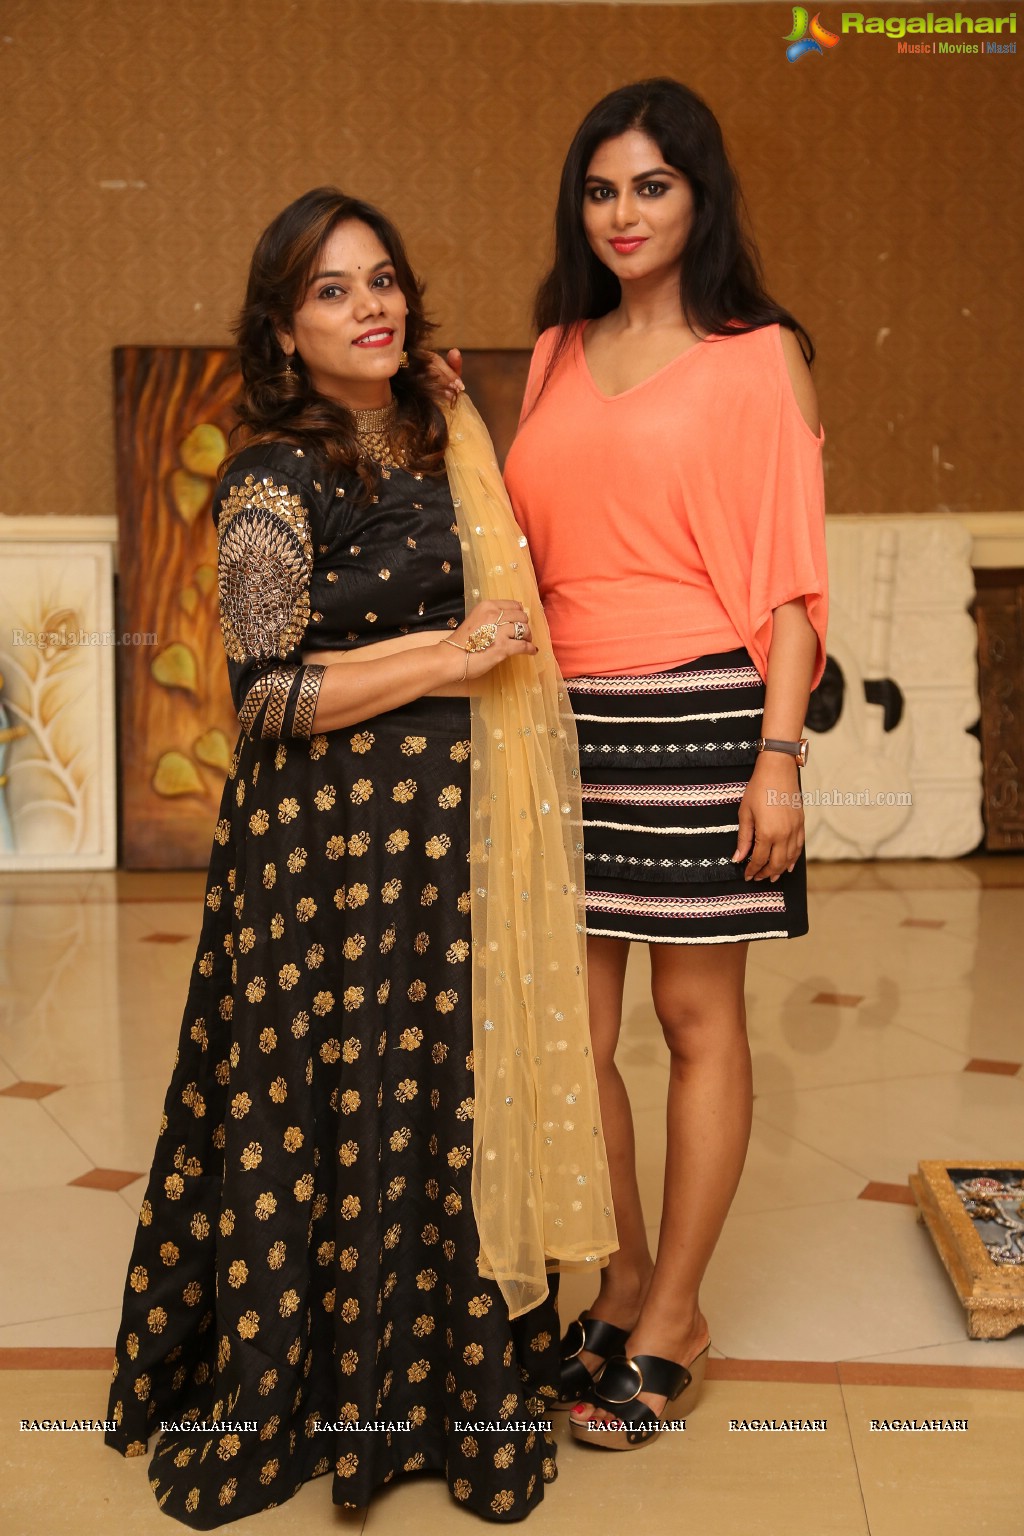 S-Mode by Swetha Reddy Exhibition and Sale at Filmnagar Cultural Center, Hyderabad